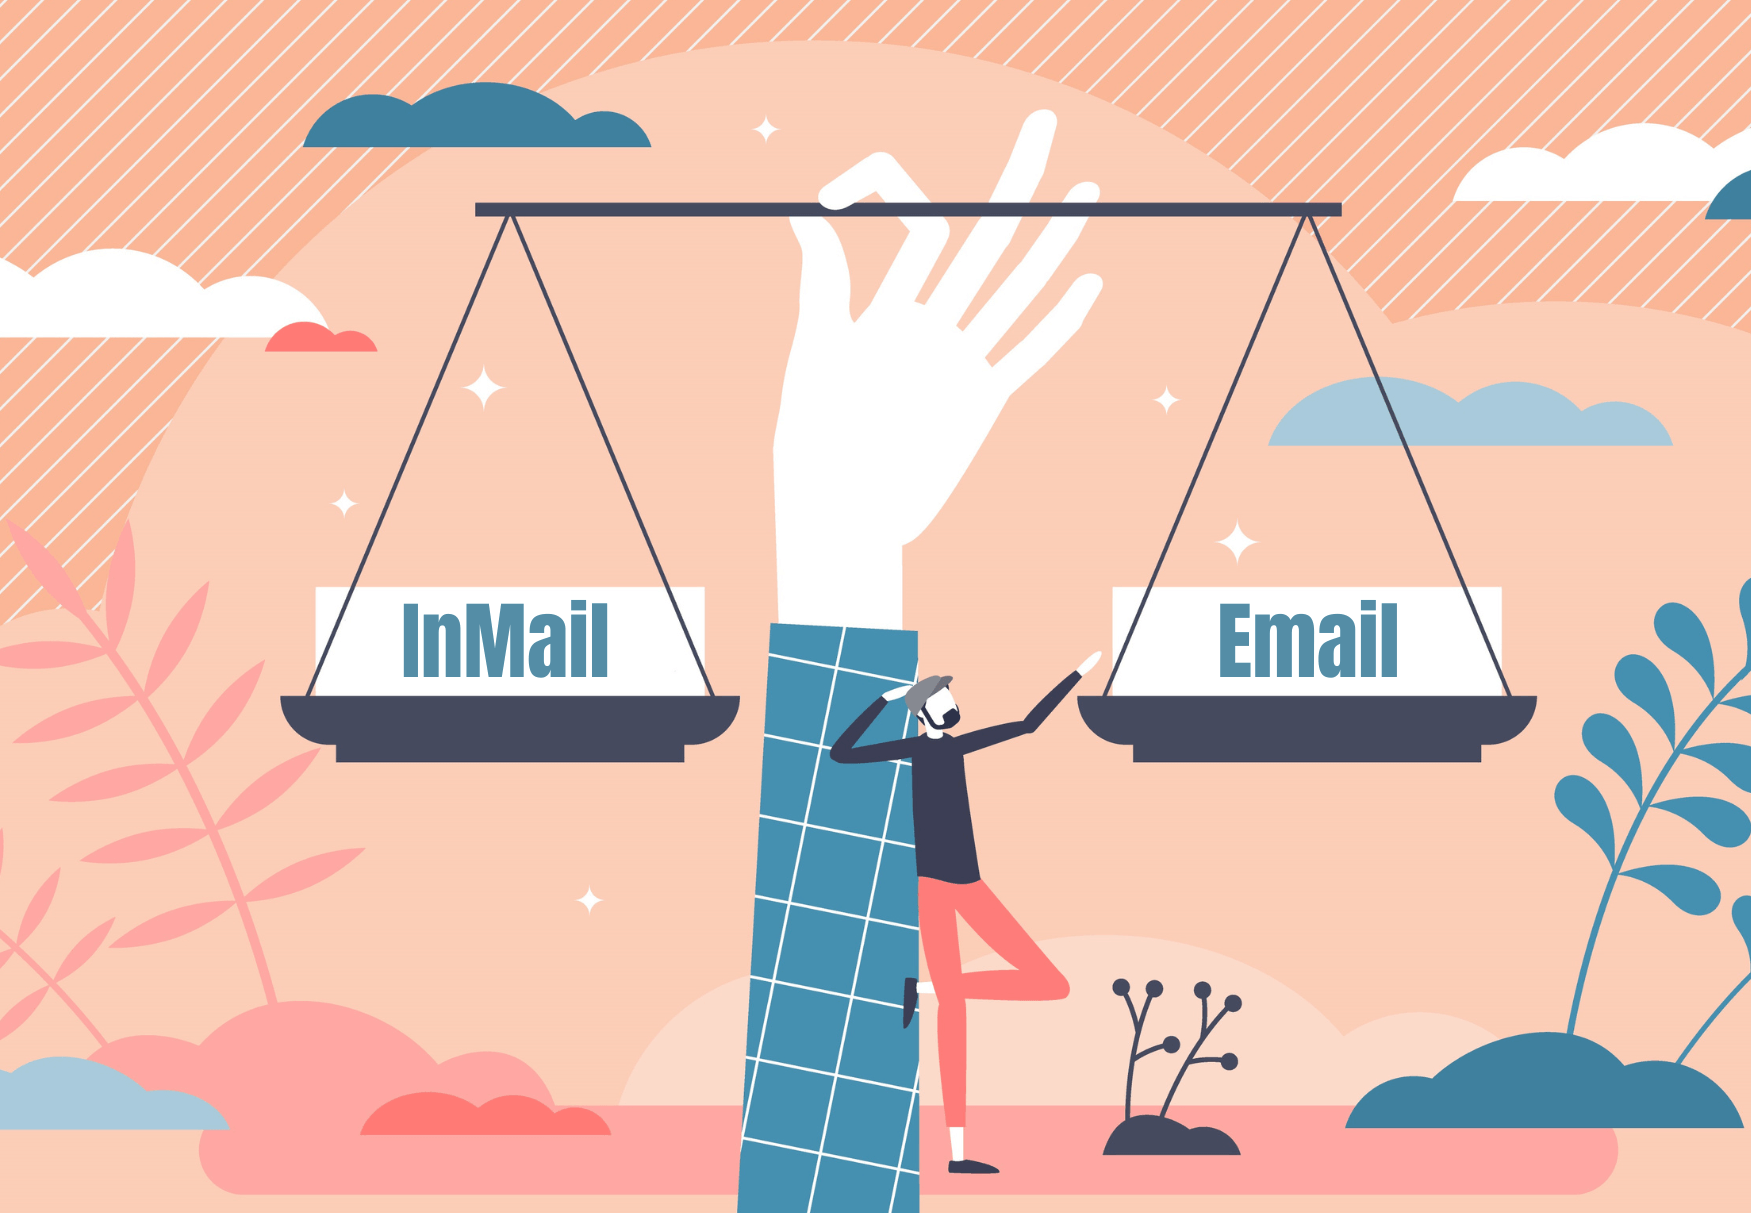 inmail-email-comparison